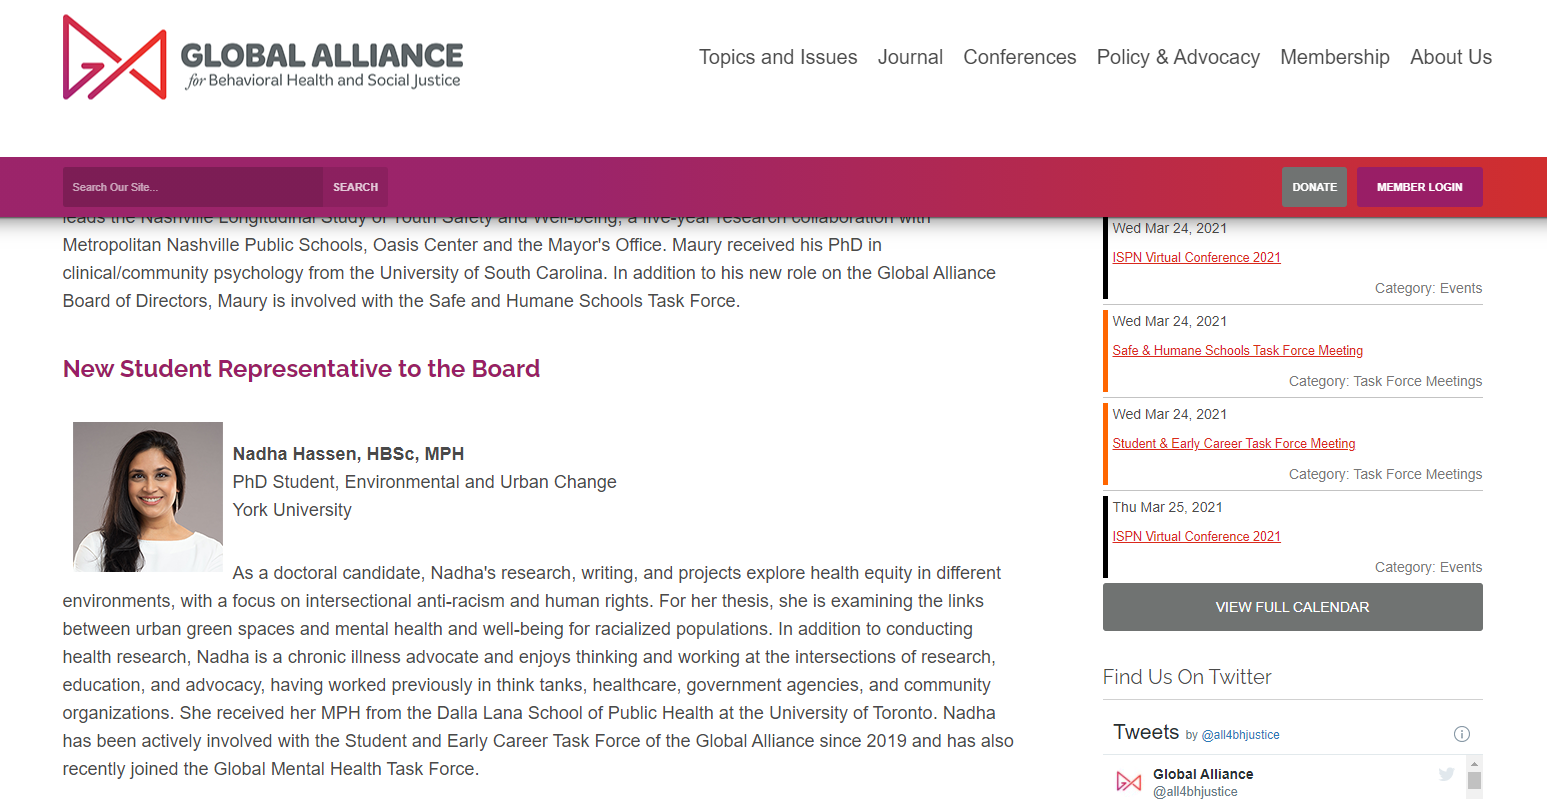 A screenshot from the Global Alliance website with Nadha's name, photo, and short bio.